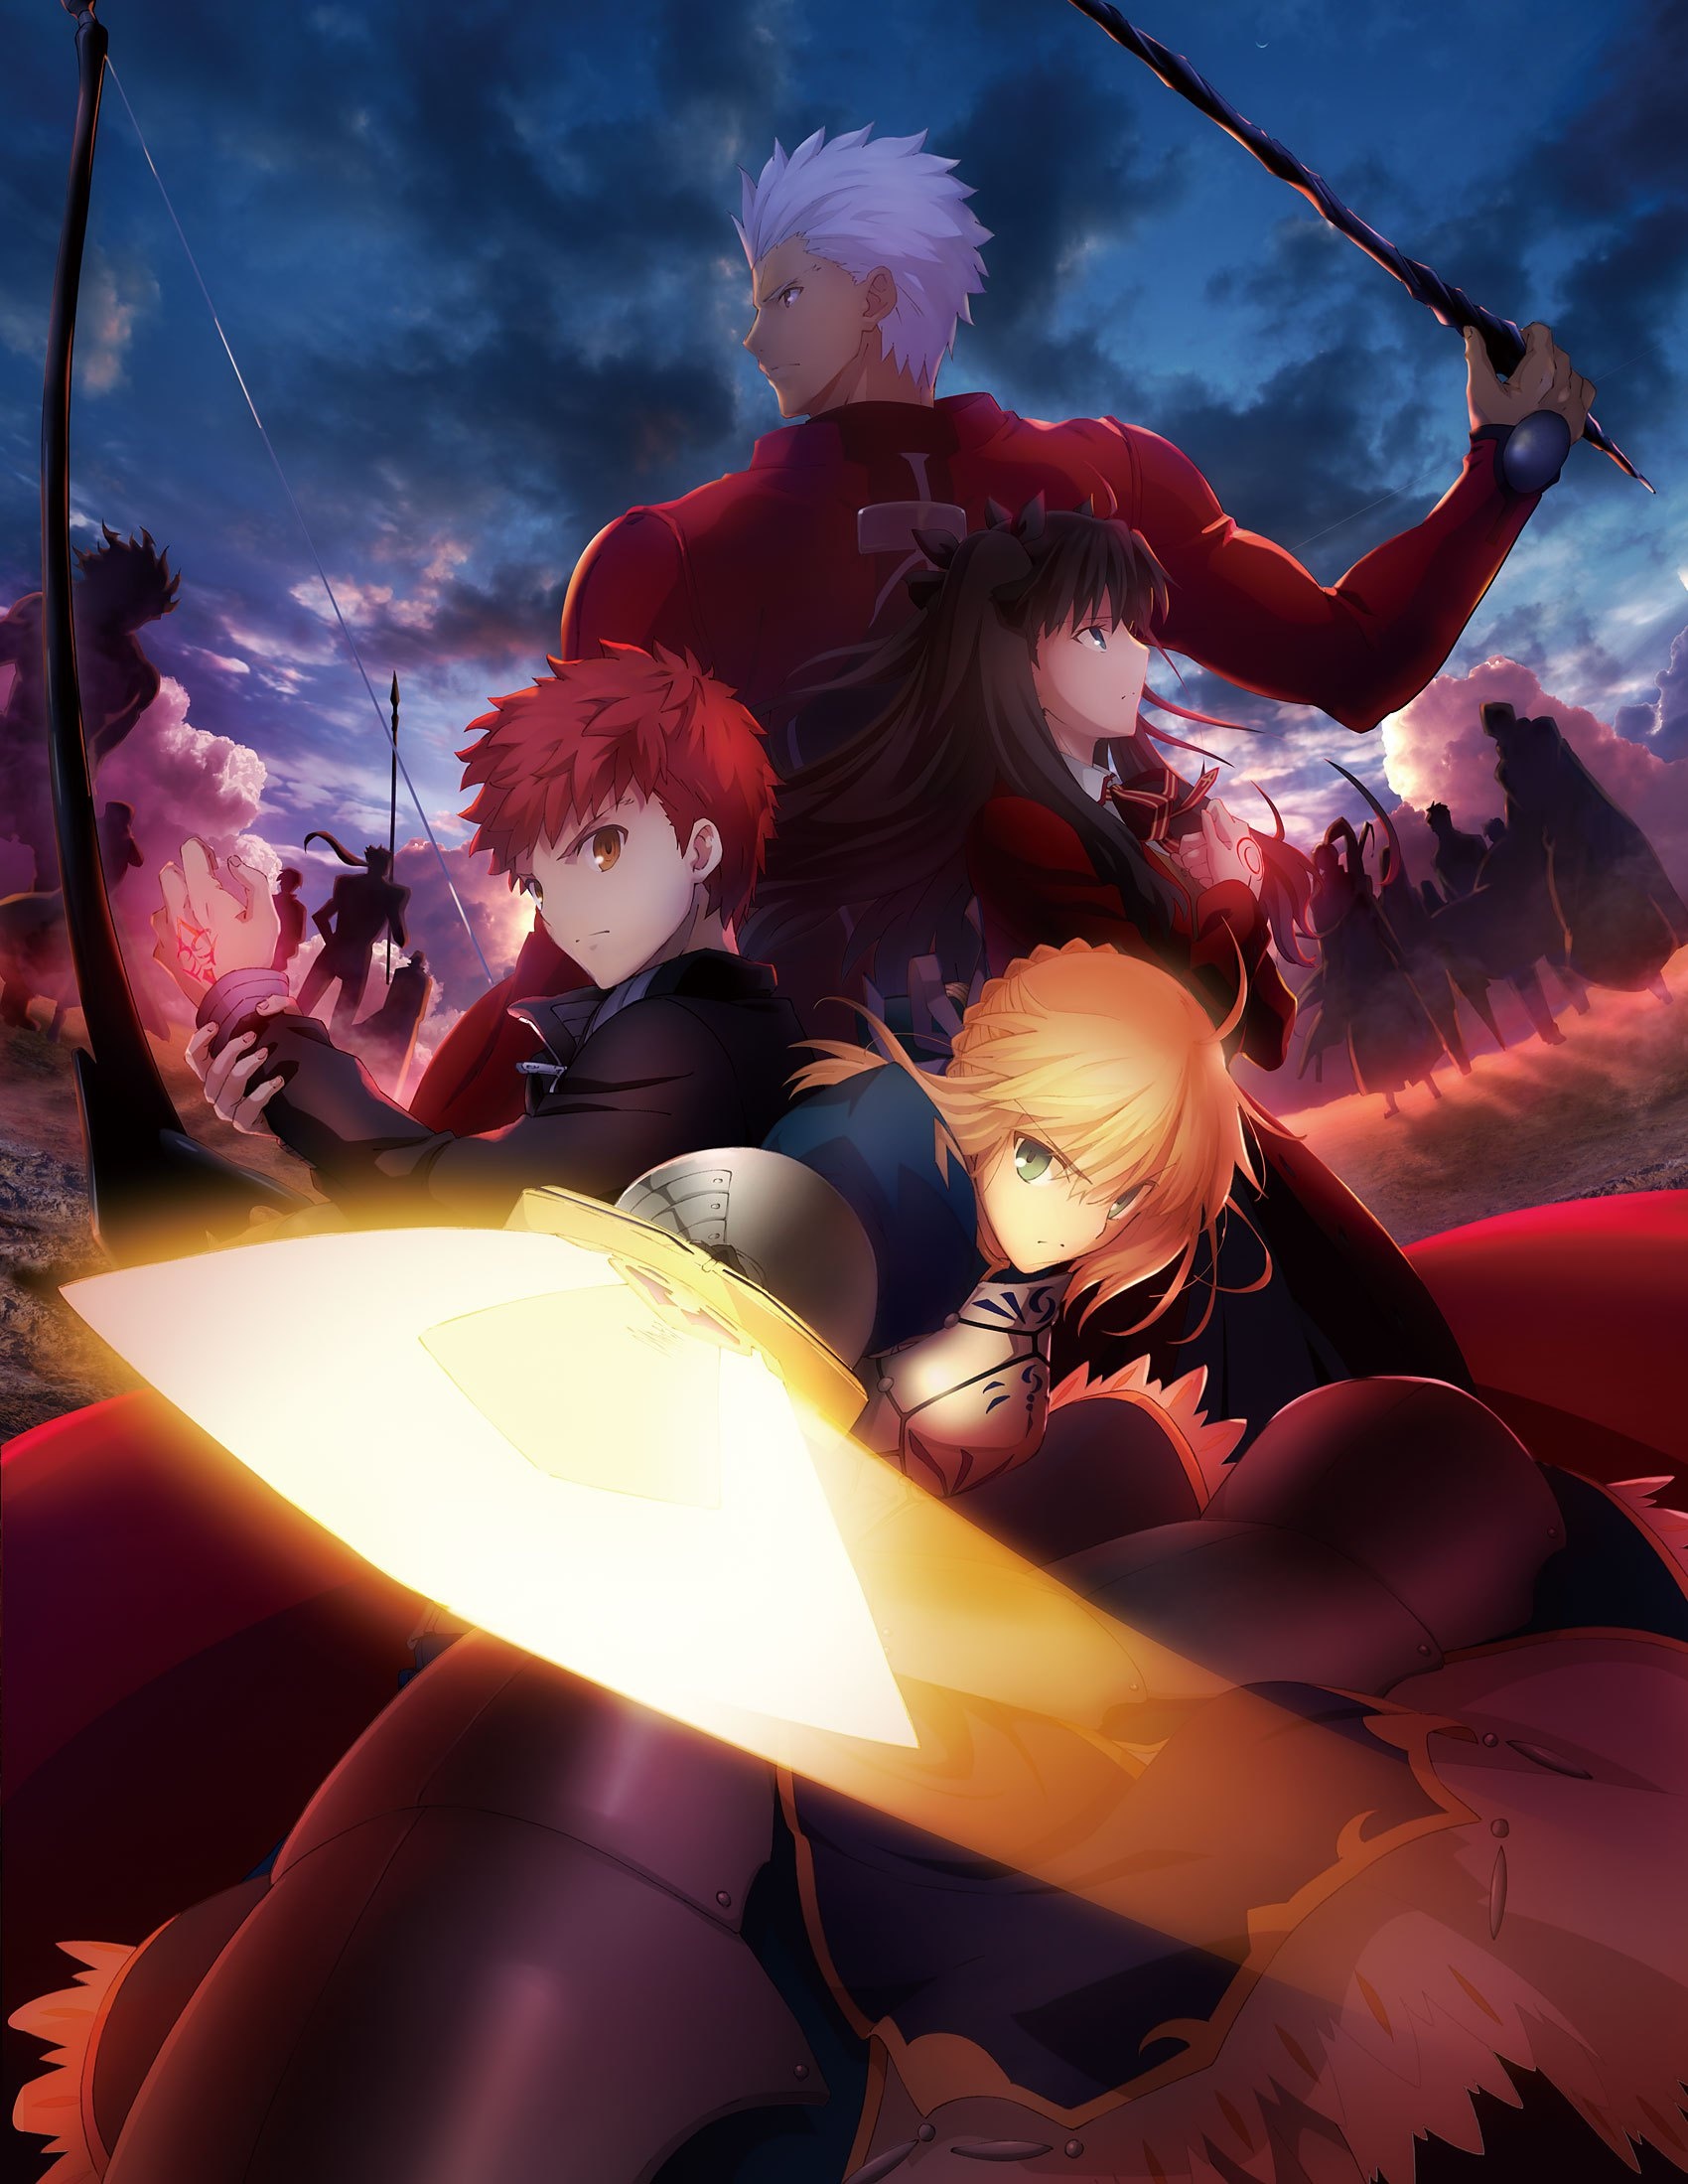 Fate/stay night: Unlimited Blade Works, Anime fantasy, Epic battles, Master and servant, 1700x2200 HD Handy